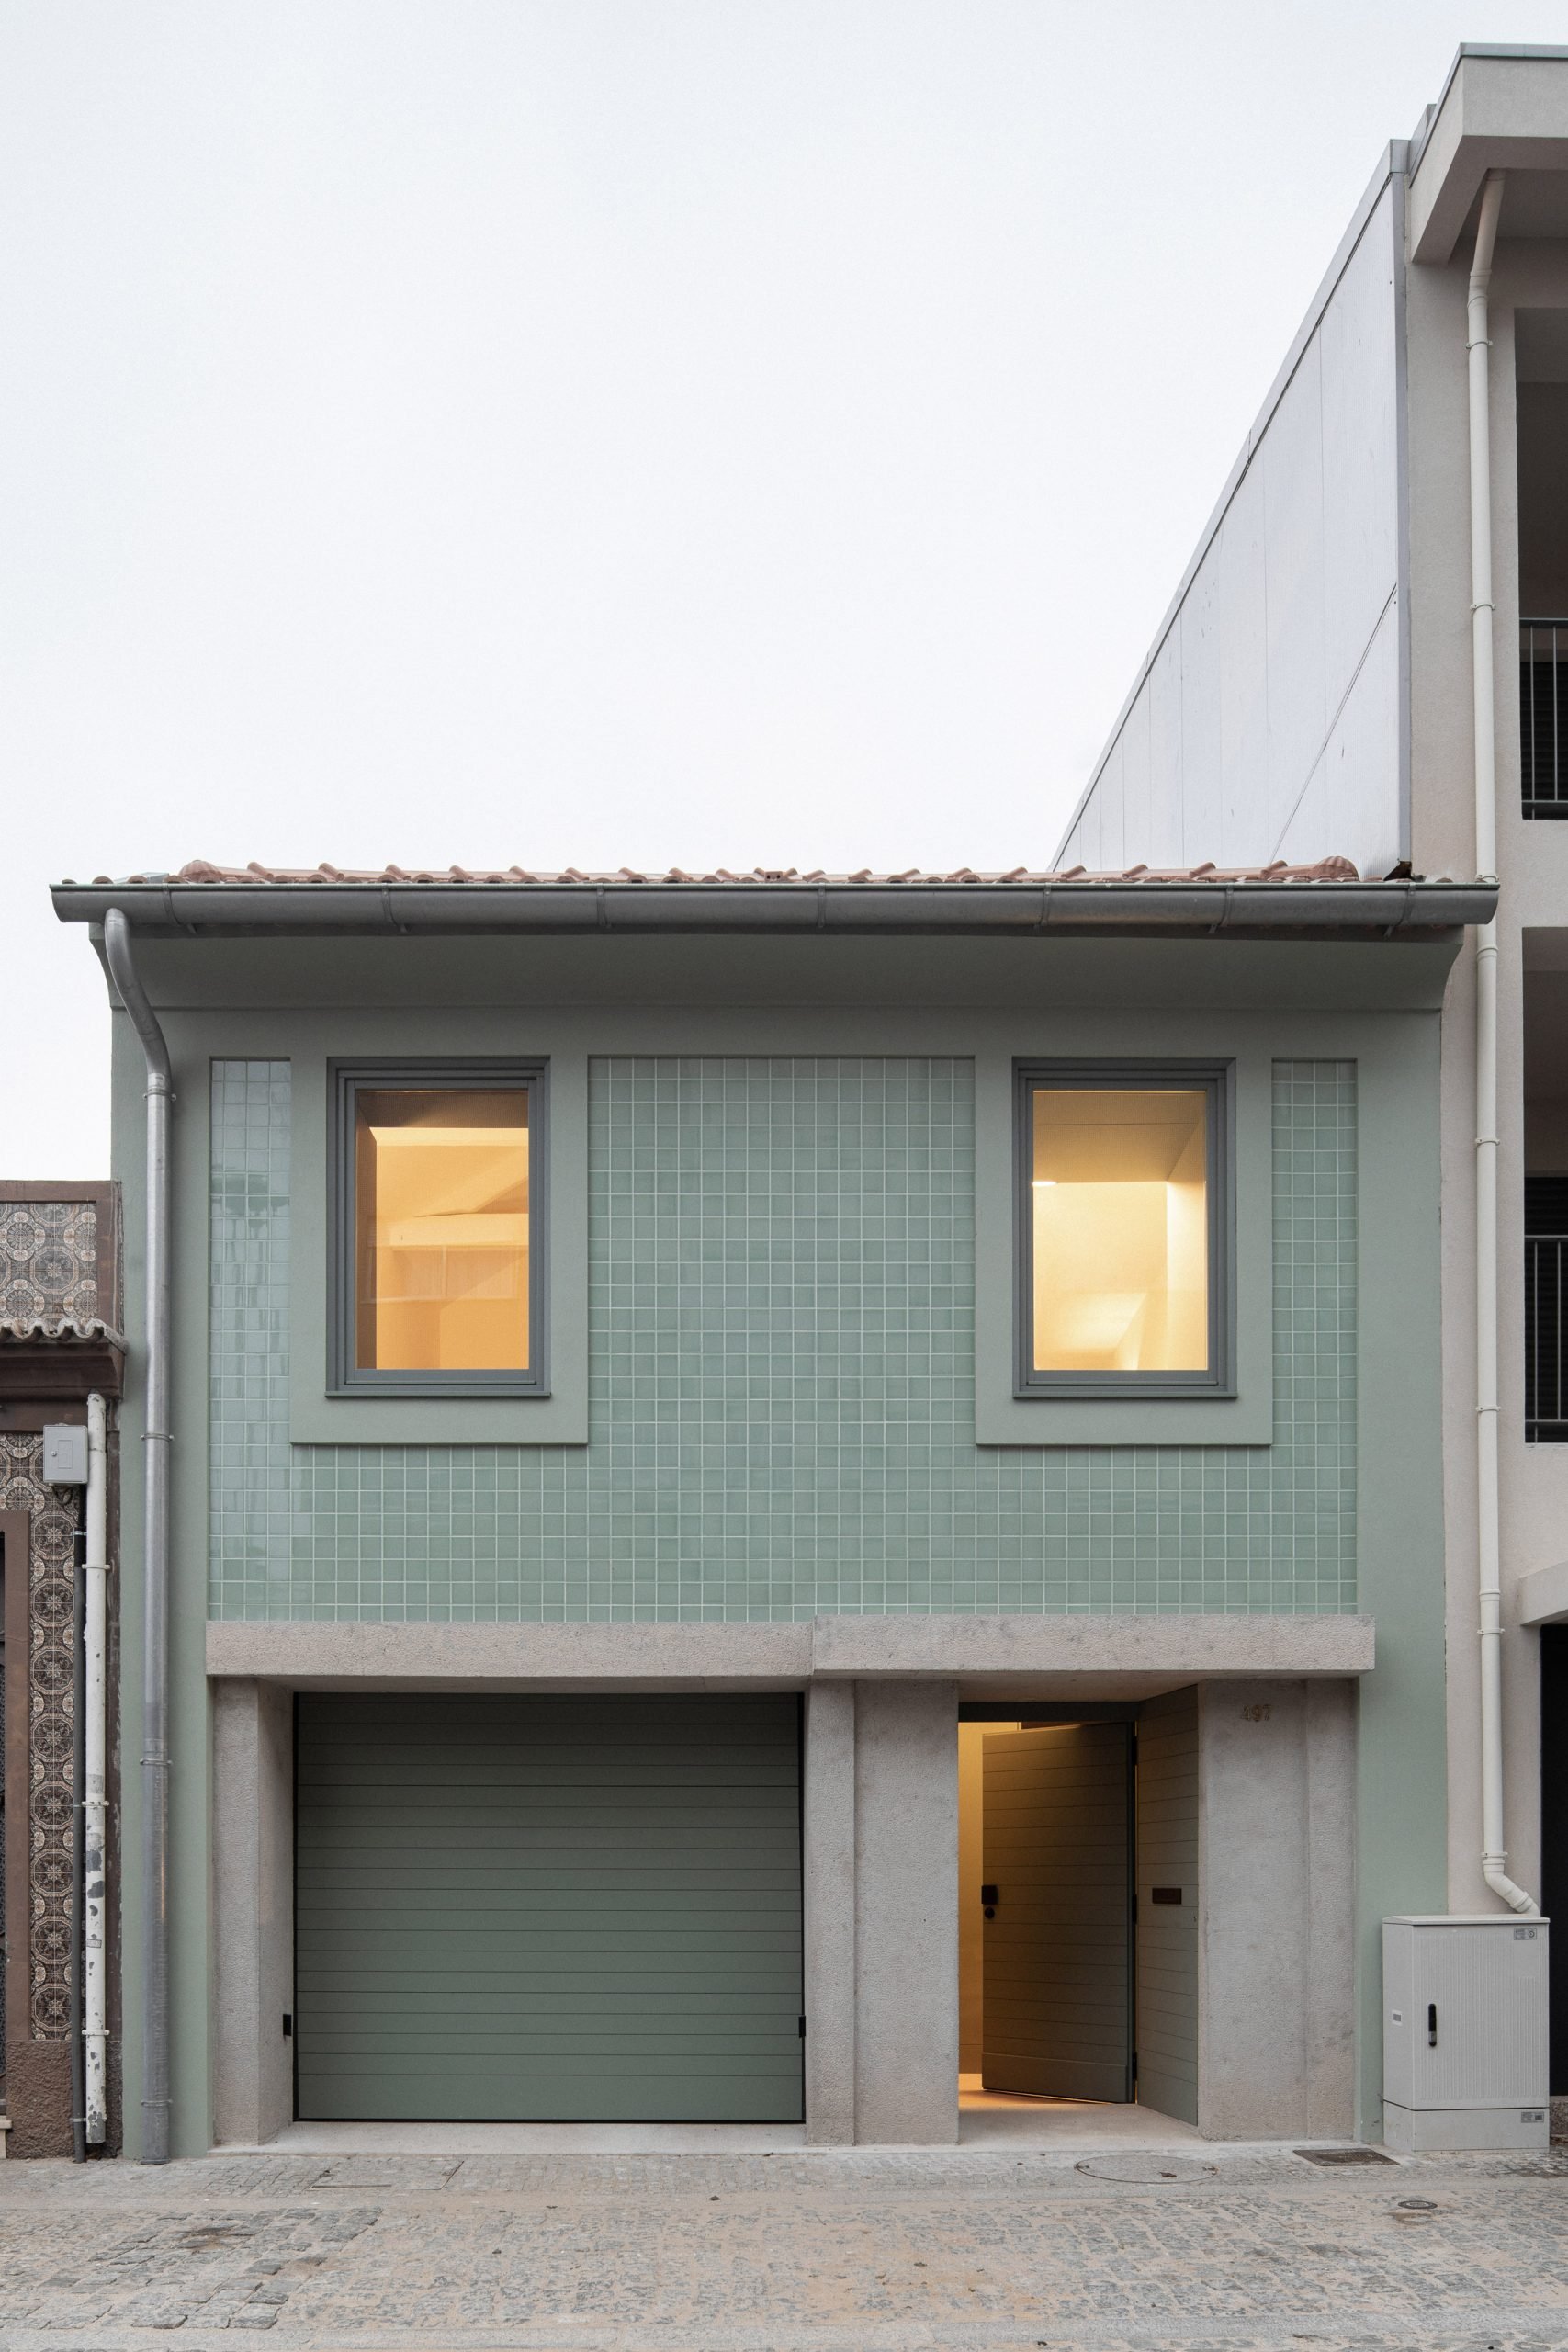 The facade has a concrete and tile material palette by depA Architects